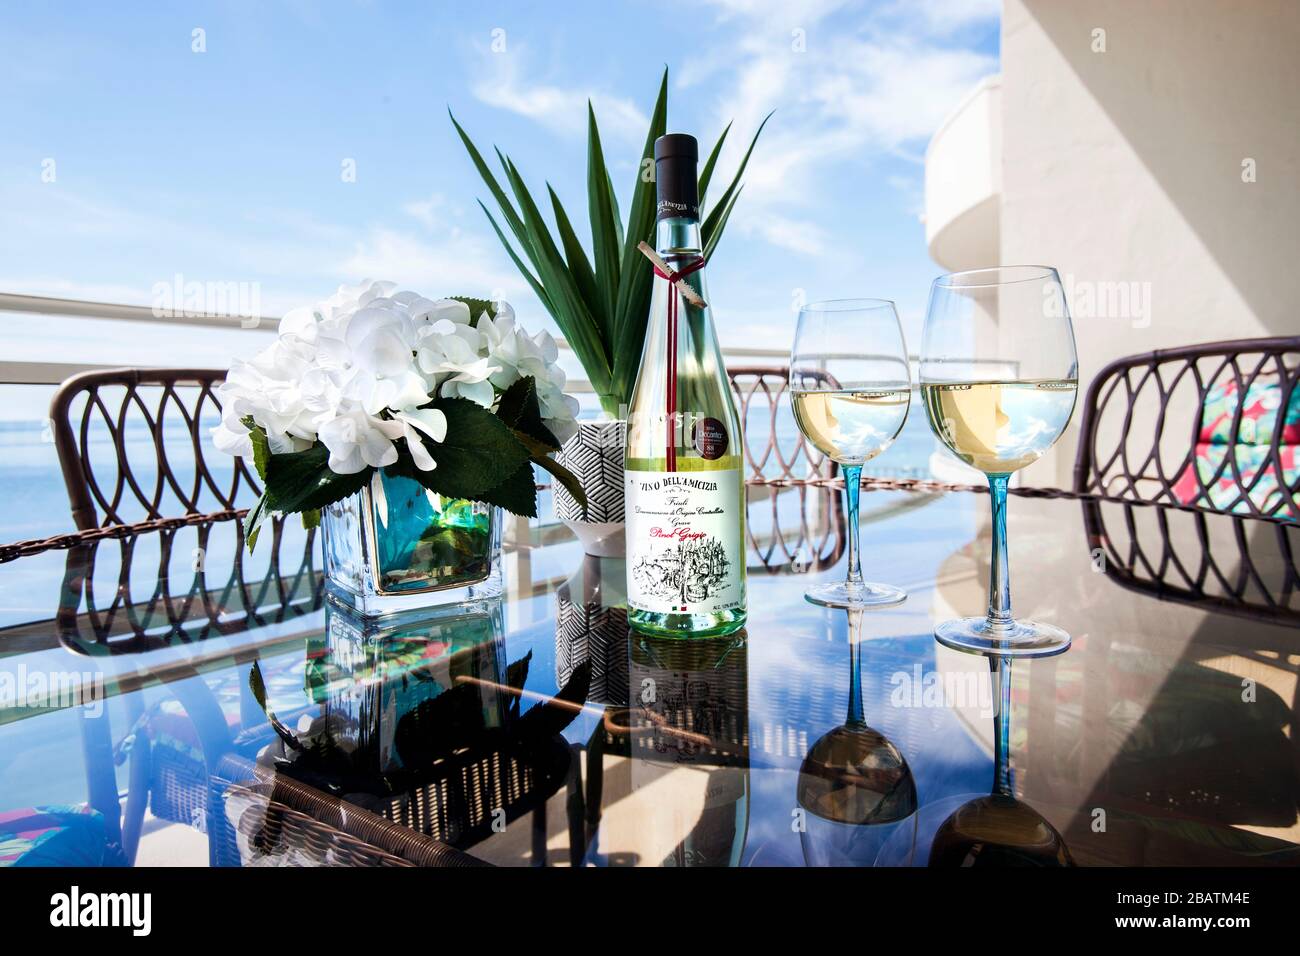 A bottle of wine with two glasses provides an inviting sitting with an ocean view Stock Photo